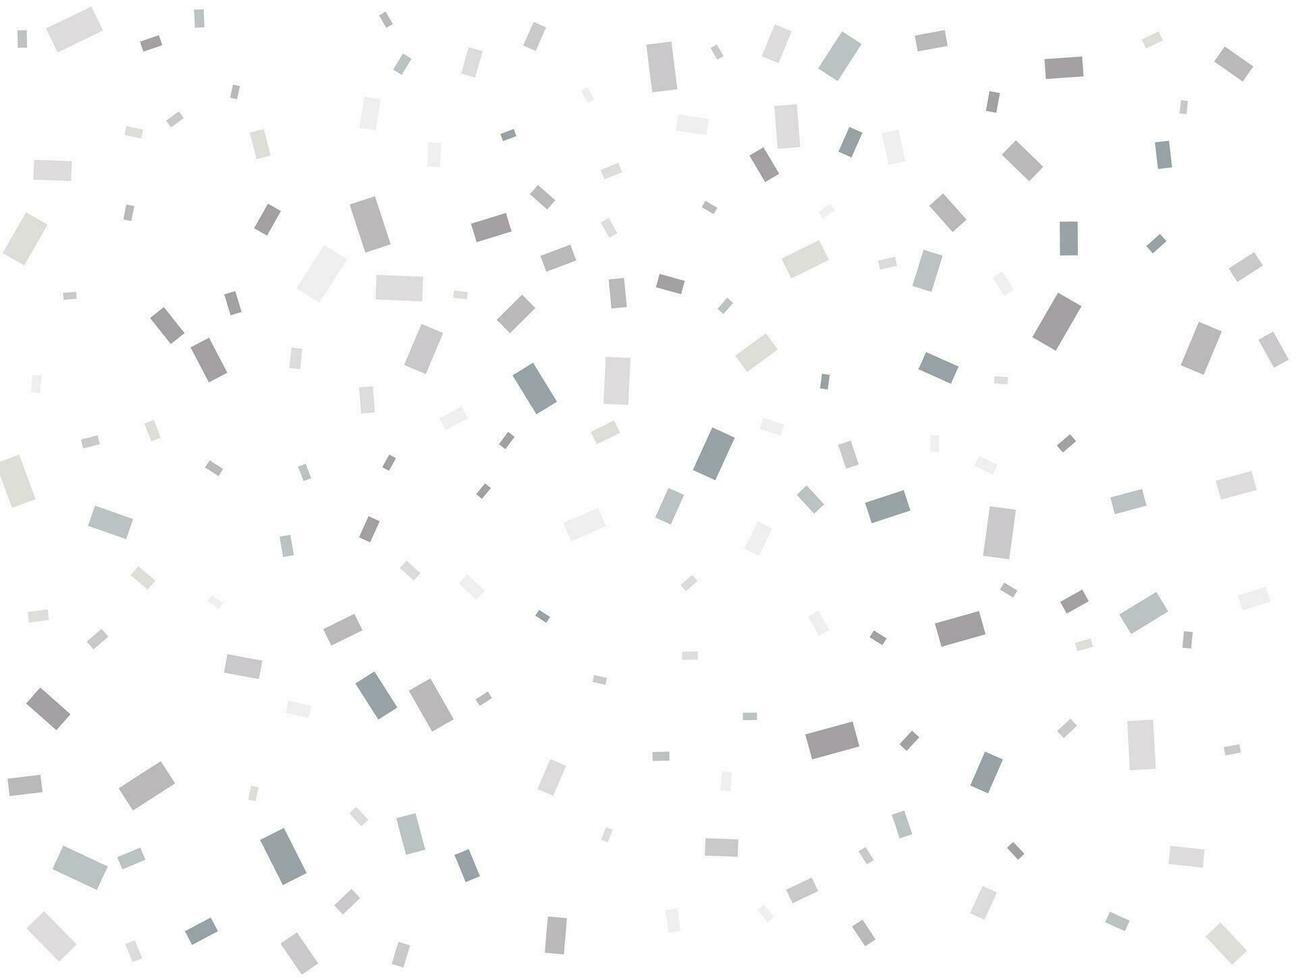 Modern Light silver Rectangular glitter confetti background. Confetti celebration, Falling Silver abstract decoration for party, birthday celebrate, anniversary or event, festive. vector